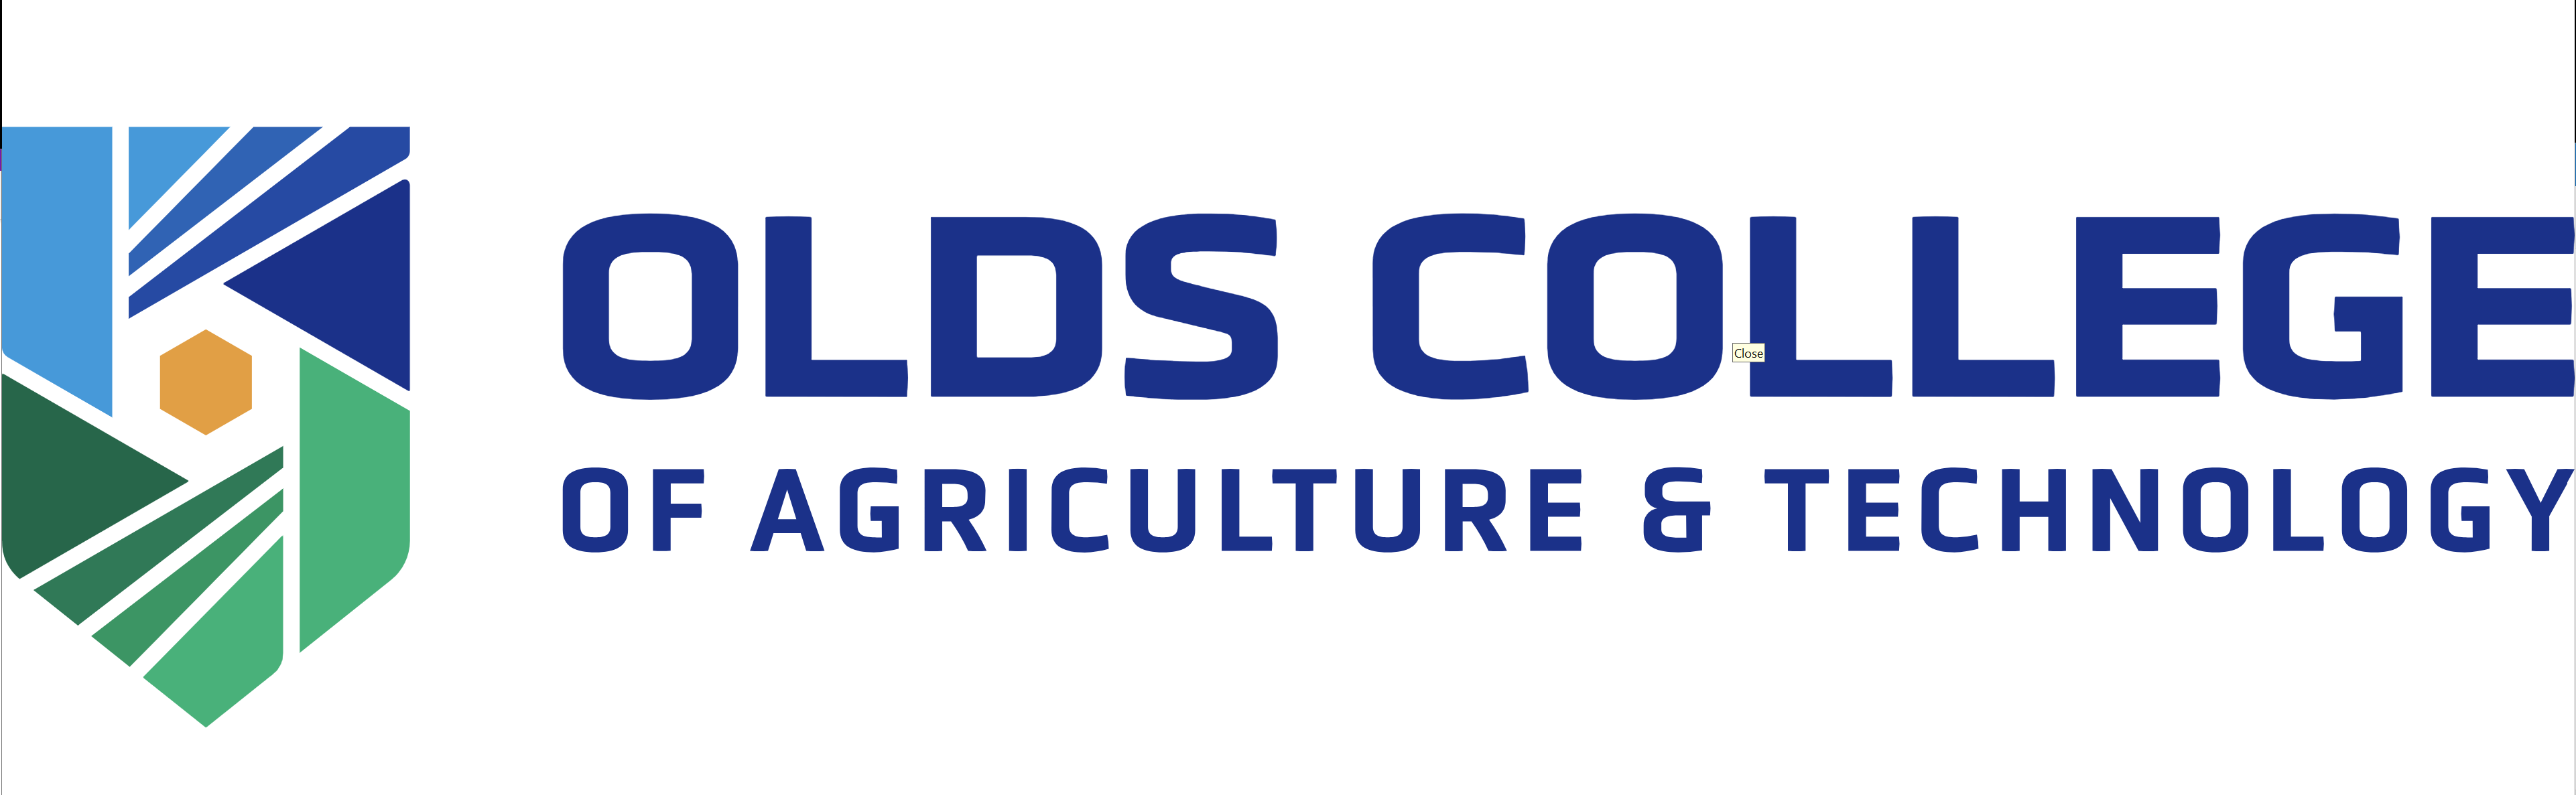 Olds College of Agriculture & Technology